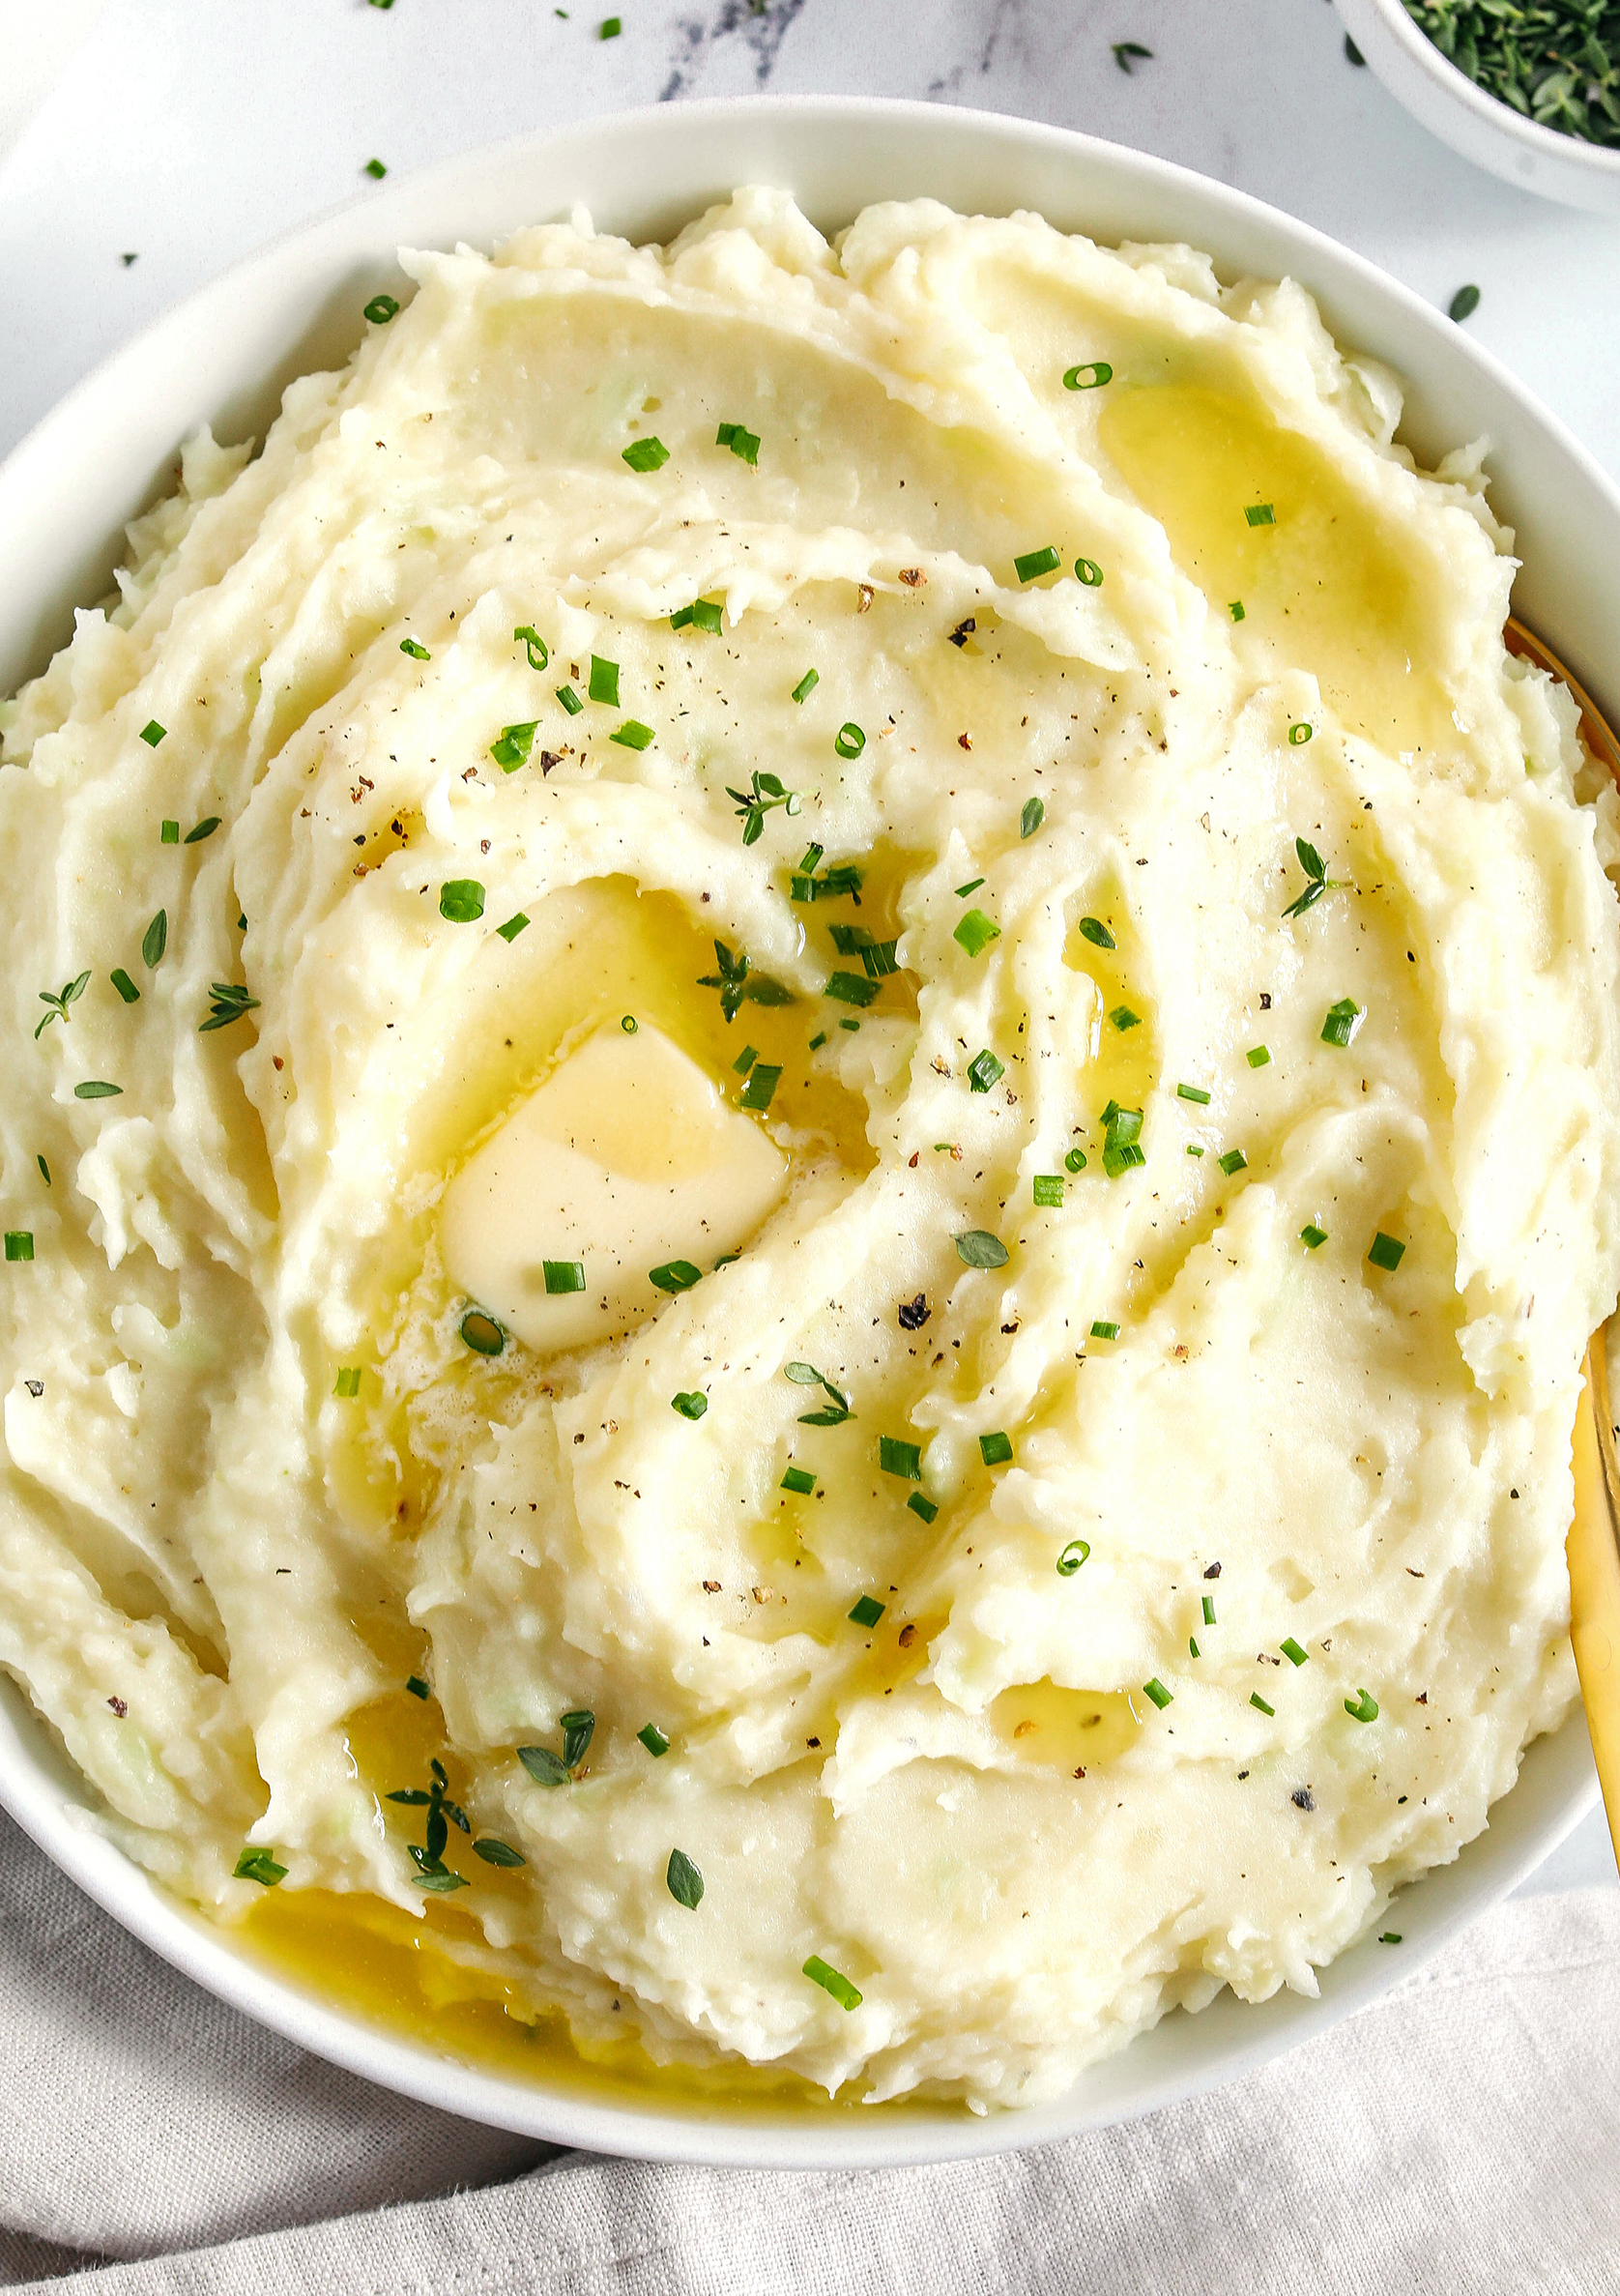 These Healthy Mashed Potatoes are creamy, absolutely delicious and made lighter with Greek yogurt, almond milk and a whole head of cauliflower!  The perfect side dish for your holiday table or weeknight dinner.